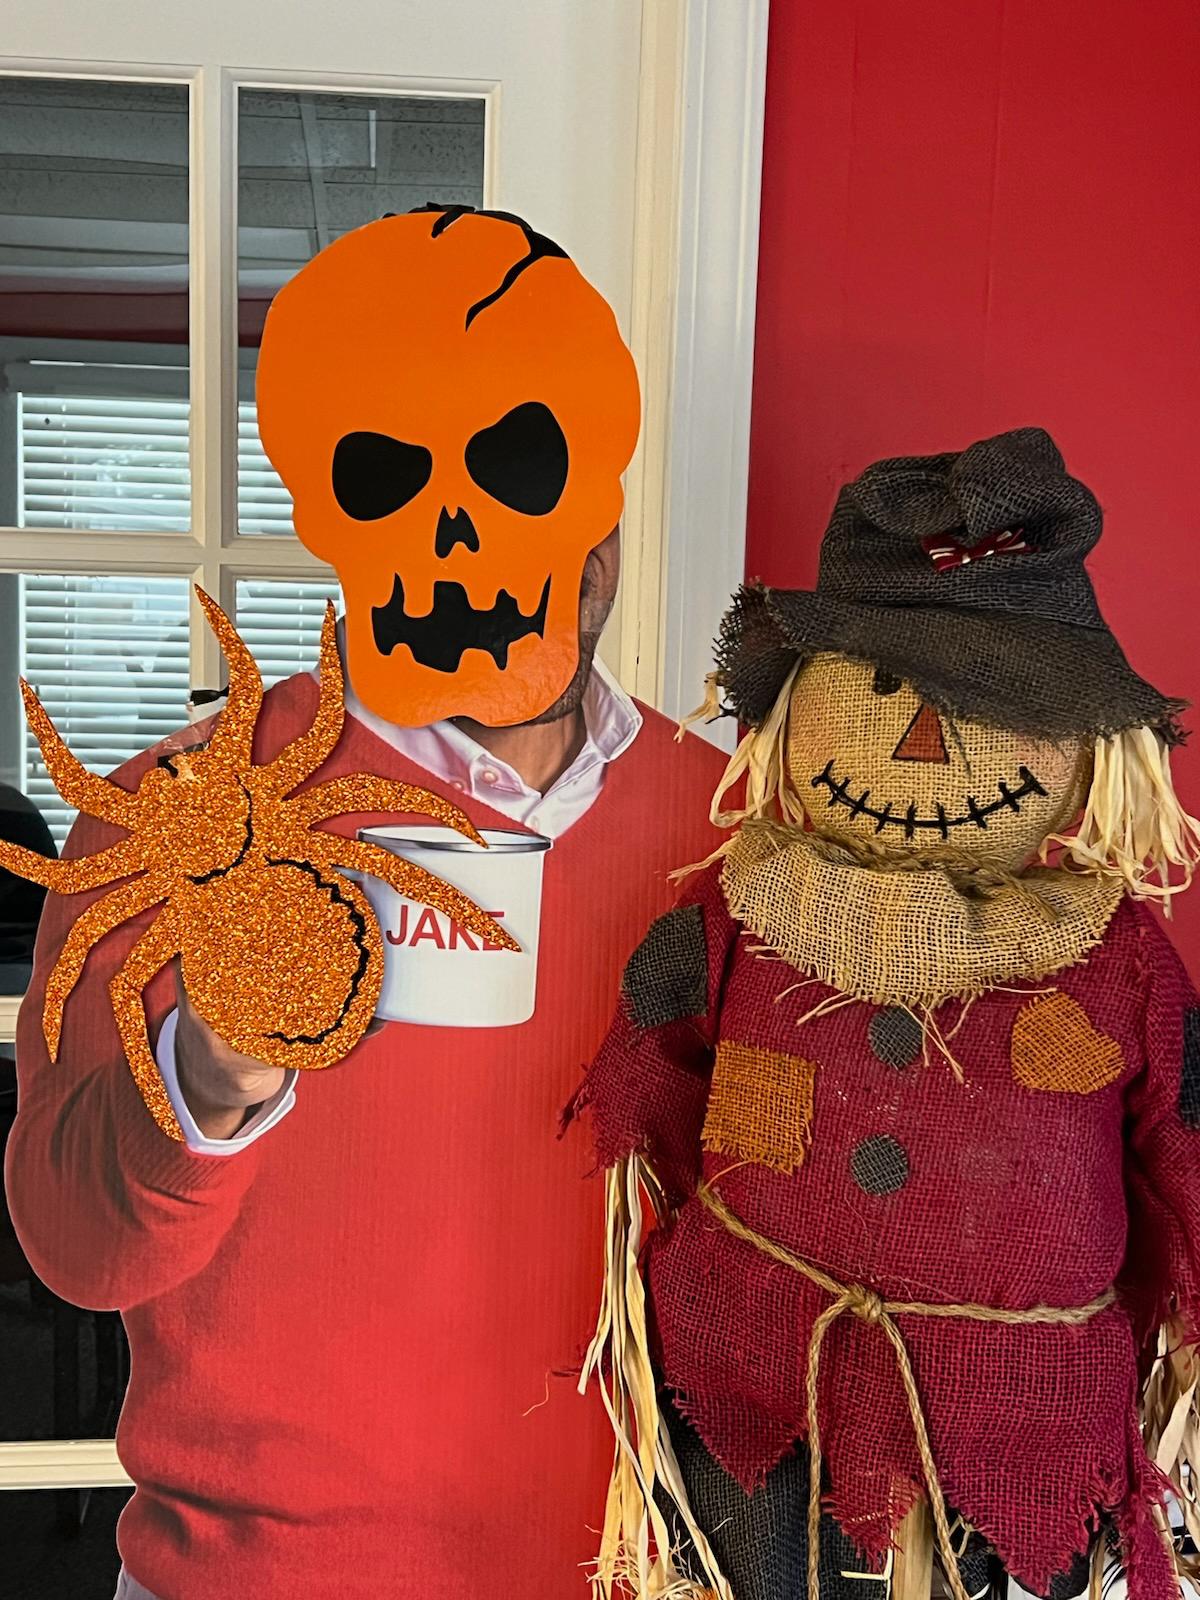 Protecting your unBOO-lievable moments! Trust Bill Schuler, the friendly scarecrow of State Farm, to keep your insurance coverage as solid as a pumpkin patch. No tricks, just treats for your peace of mind. Get a quote today!